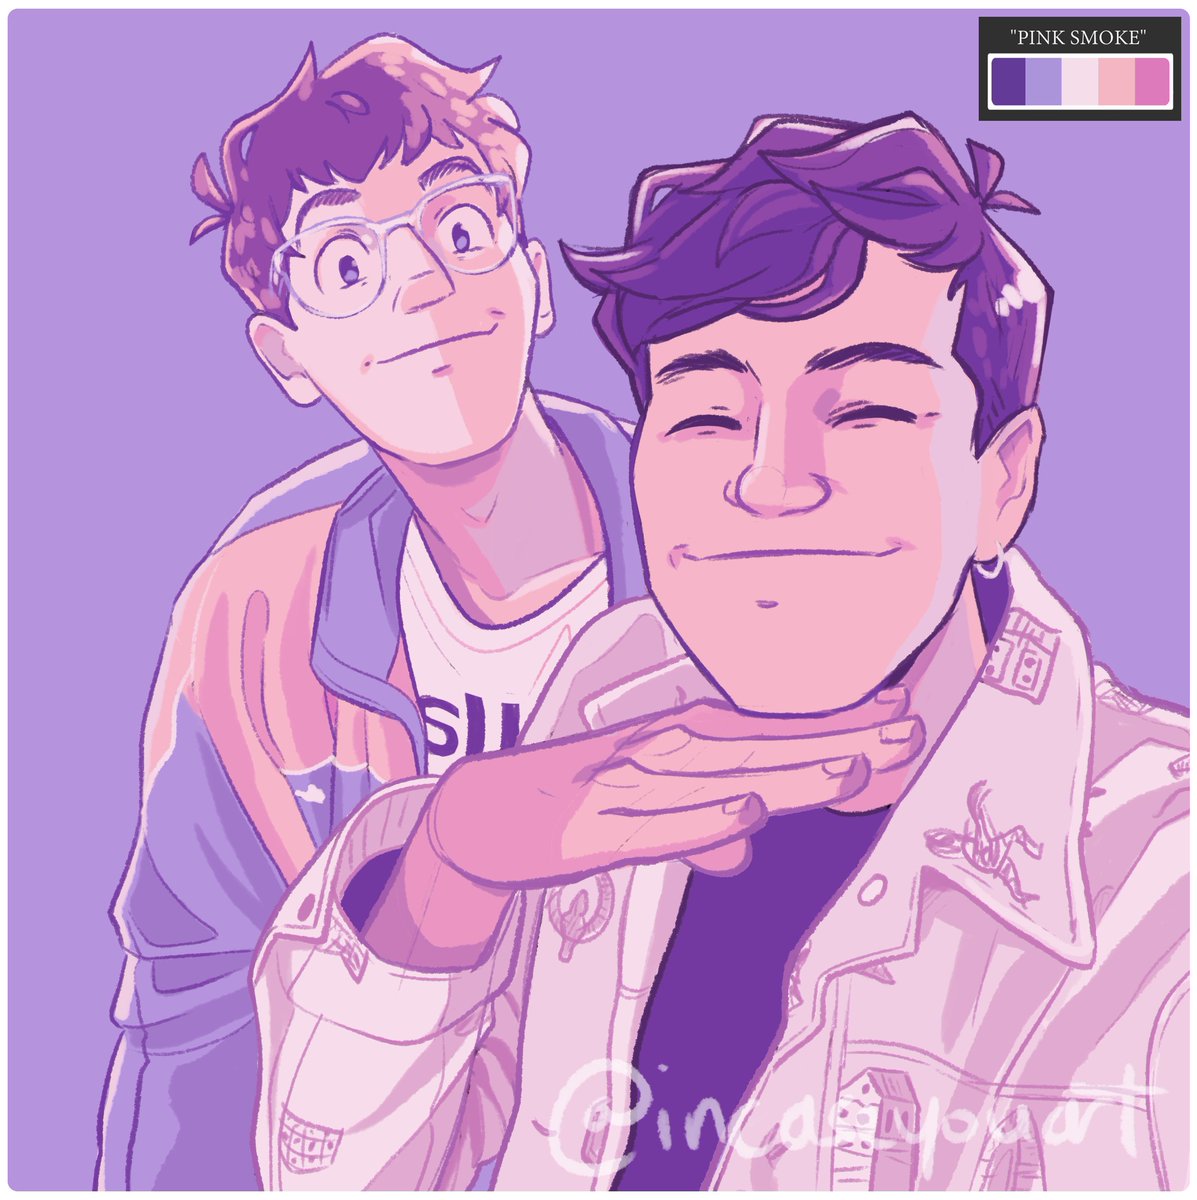 Soft (and neat) Dan and Phil for a palette challenge 💜

#phanart